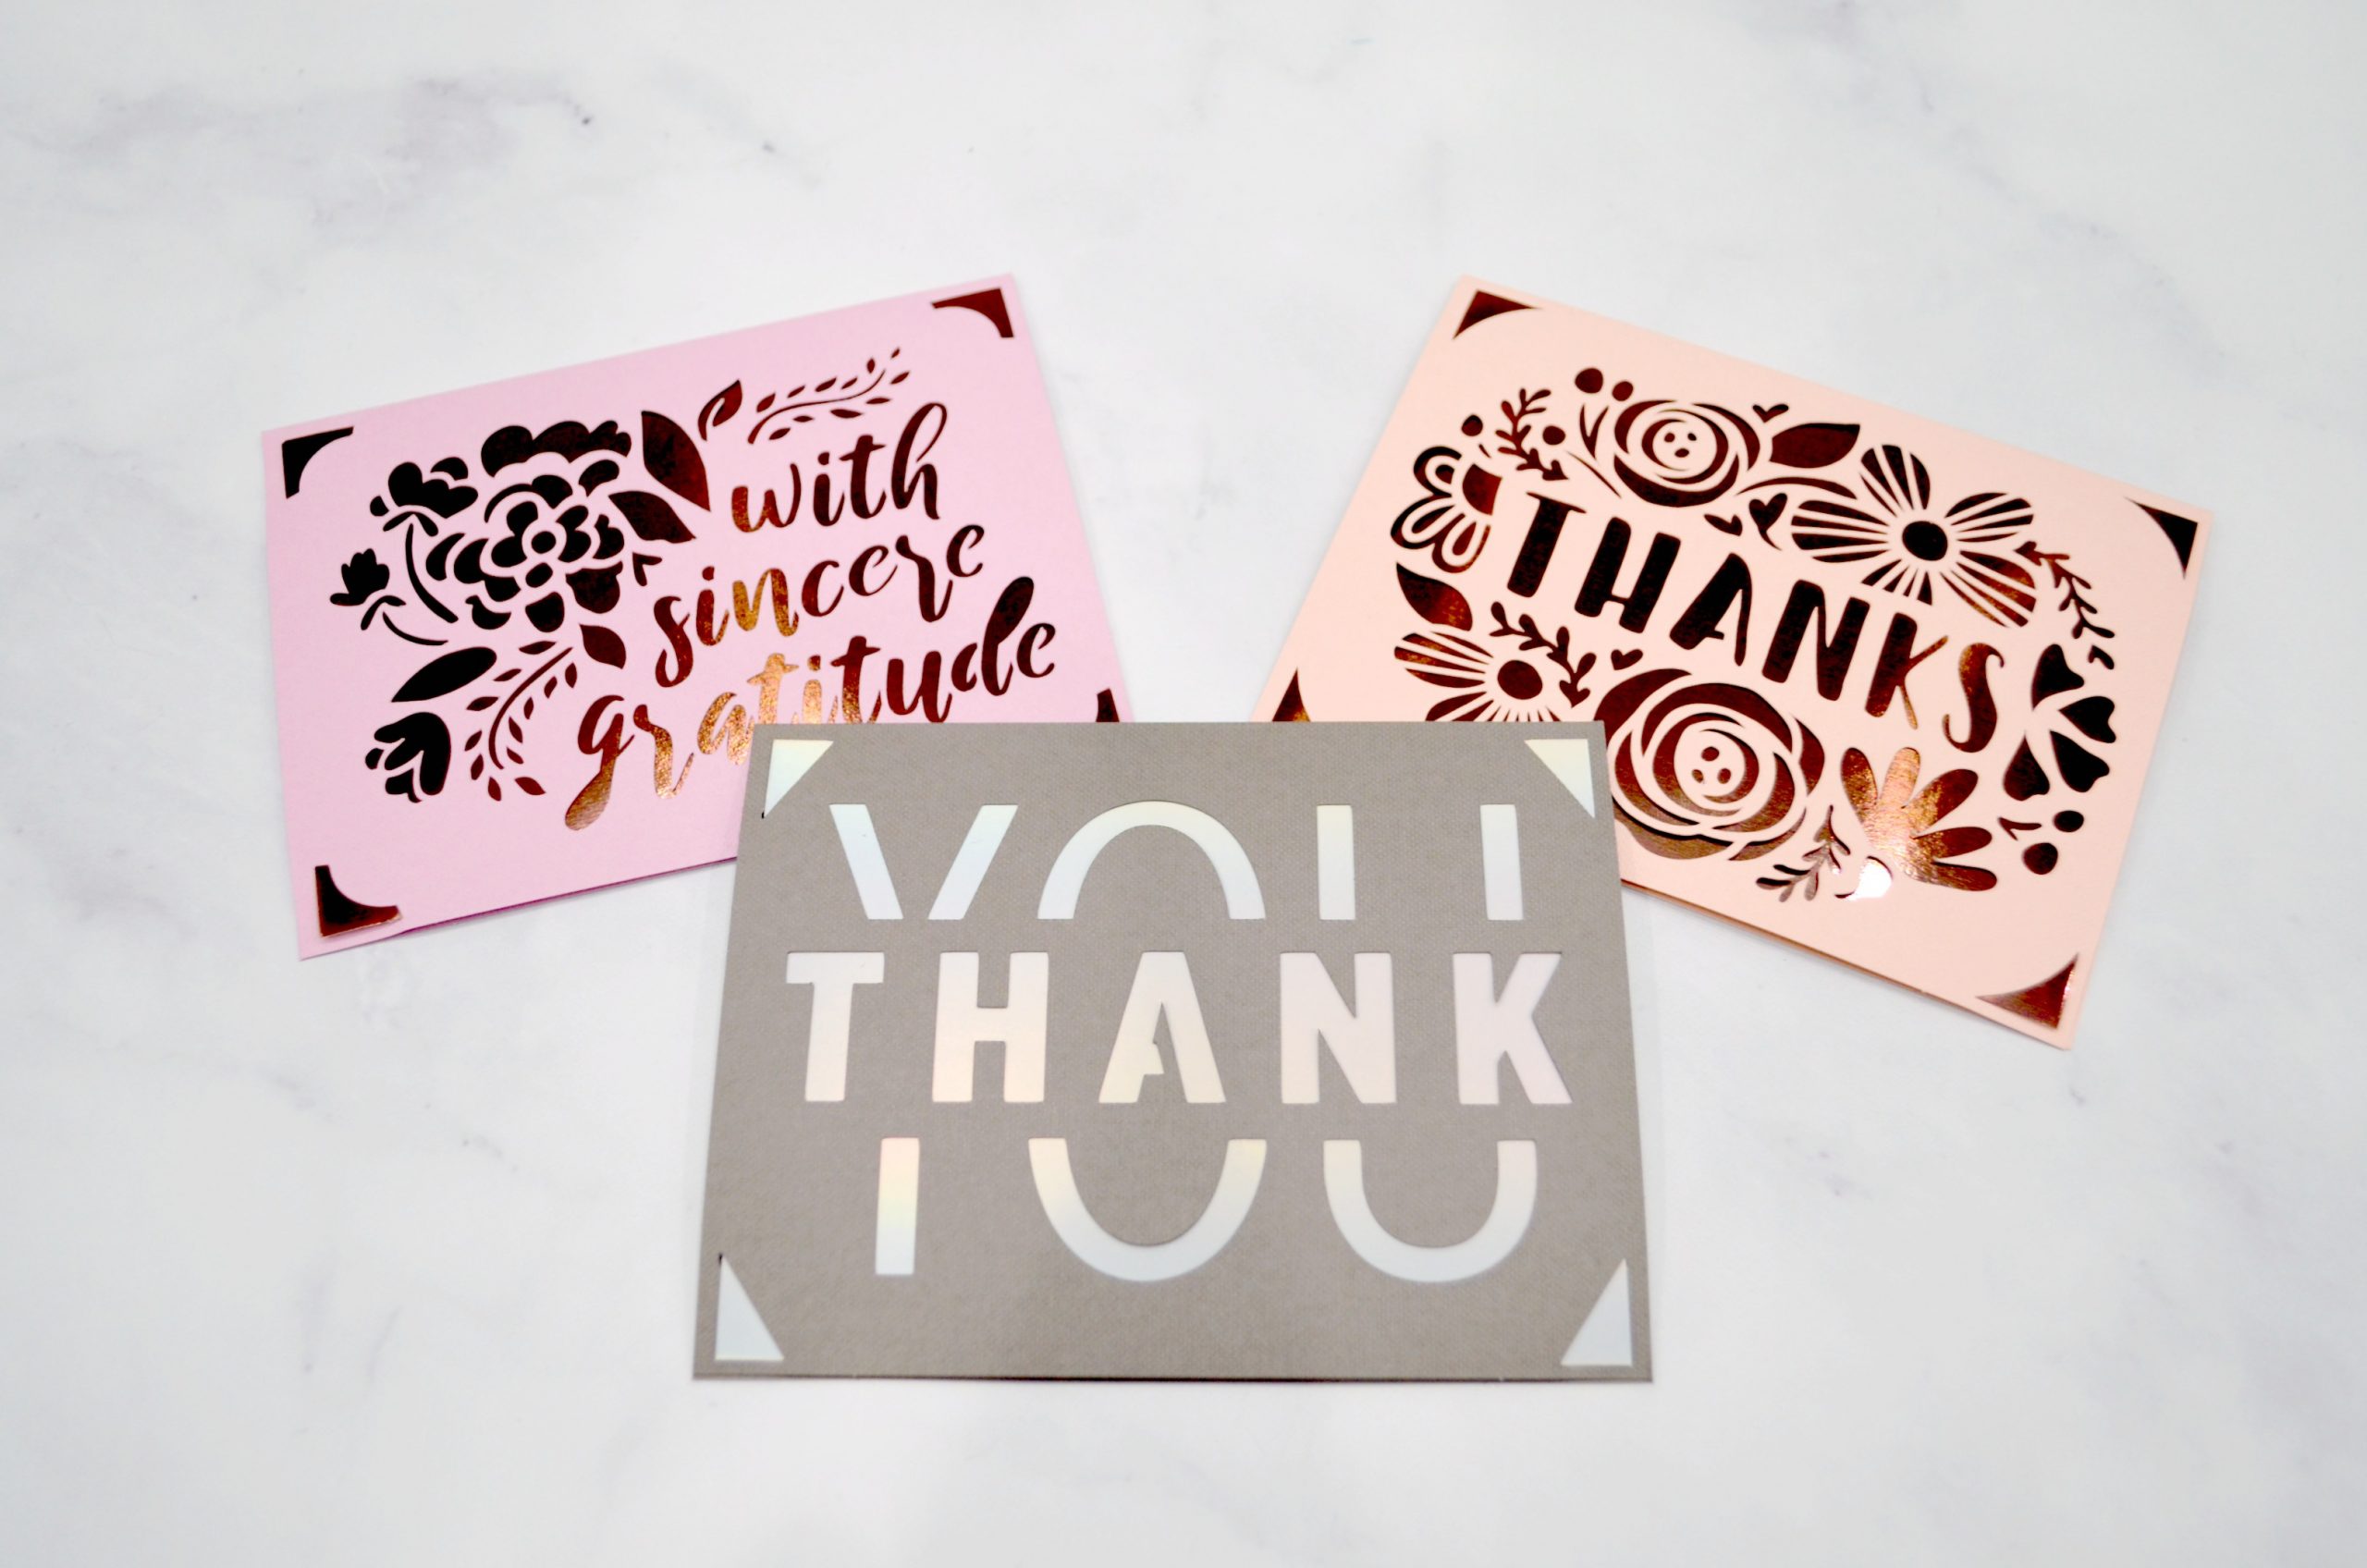 Cricut Joy Materials: A Guide for Successful Cutting - Hey, Let's